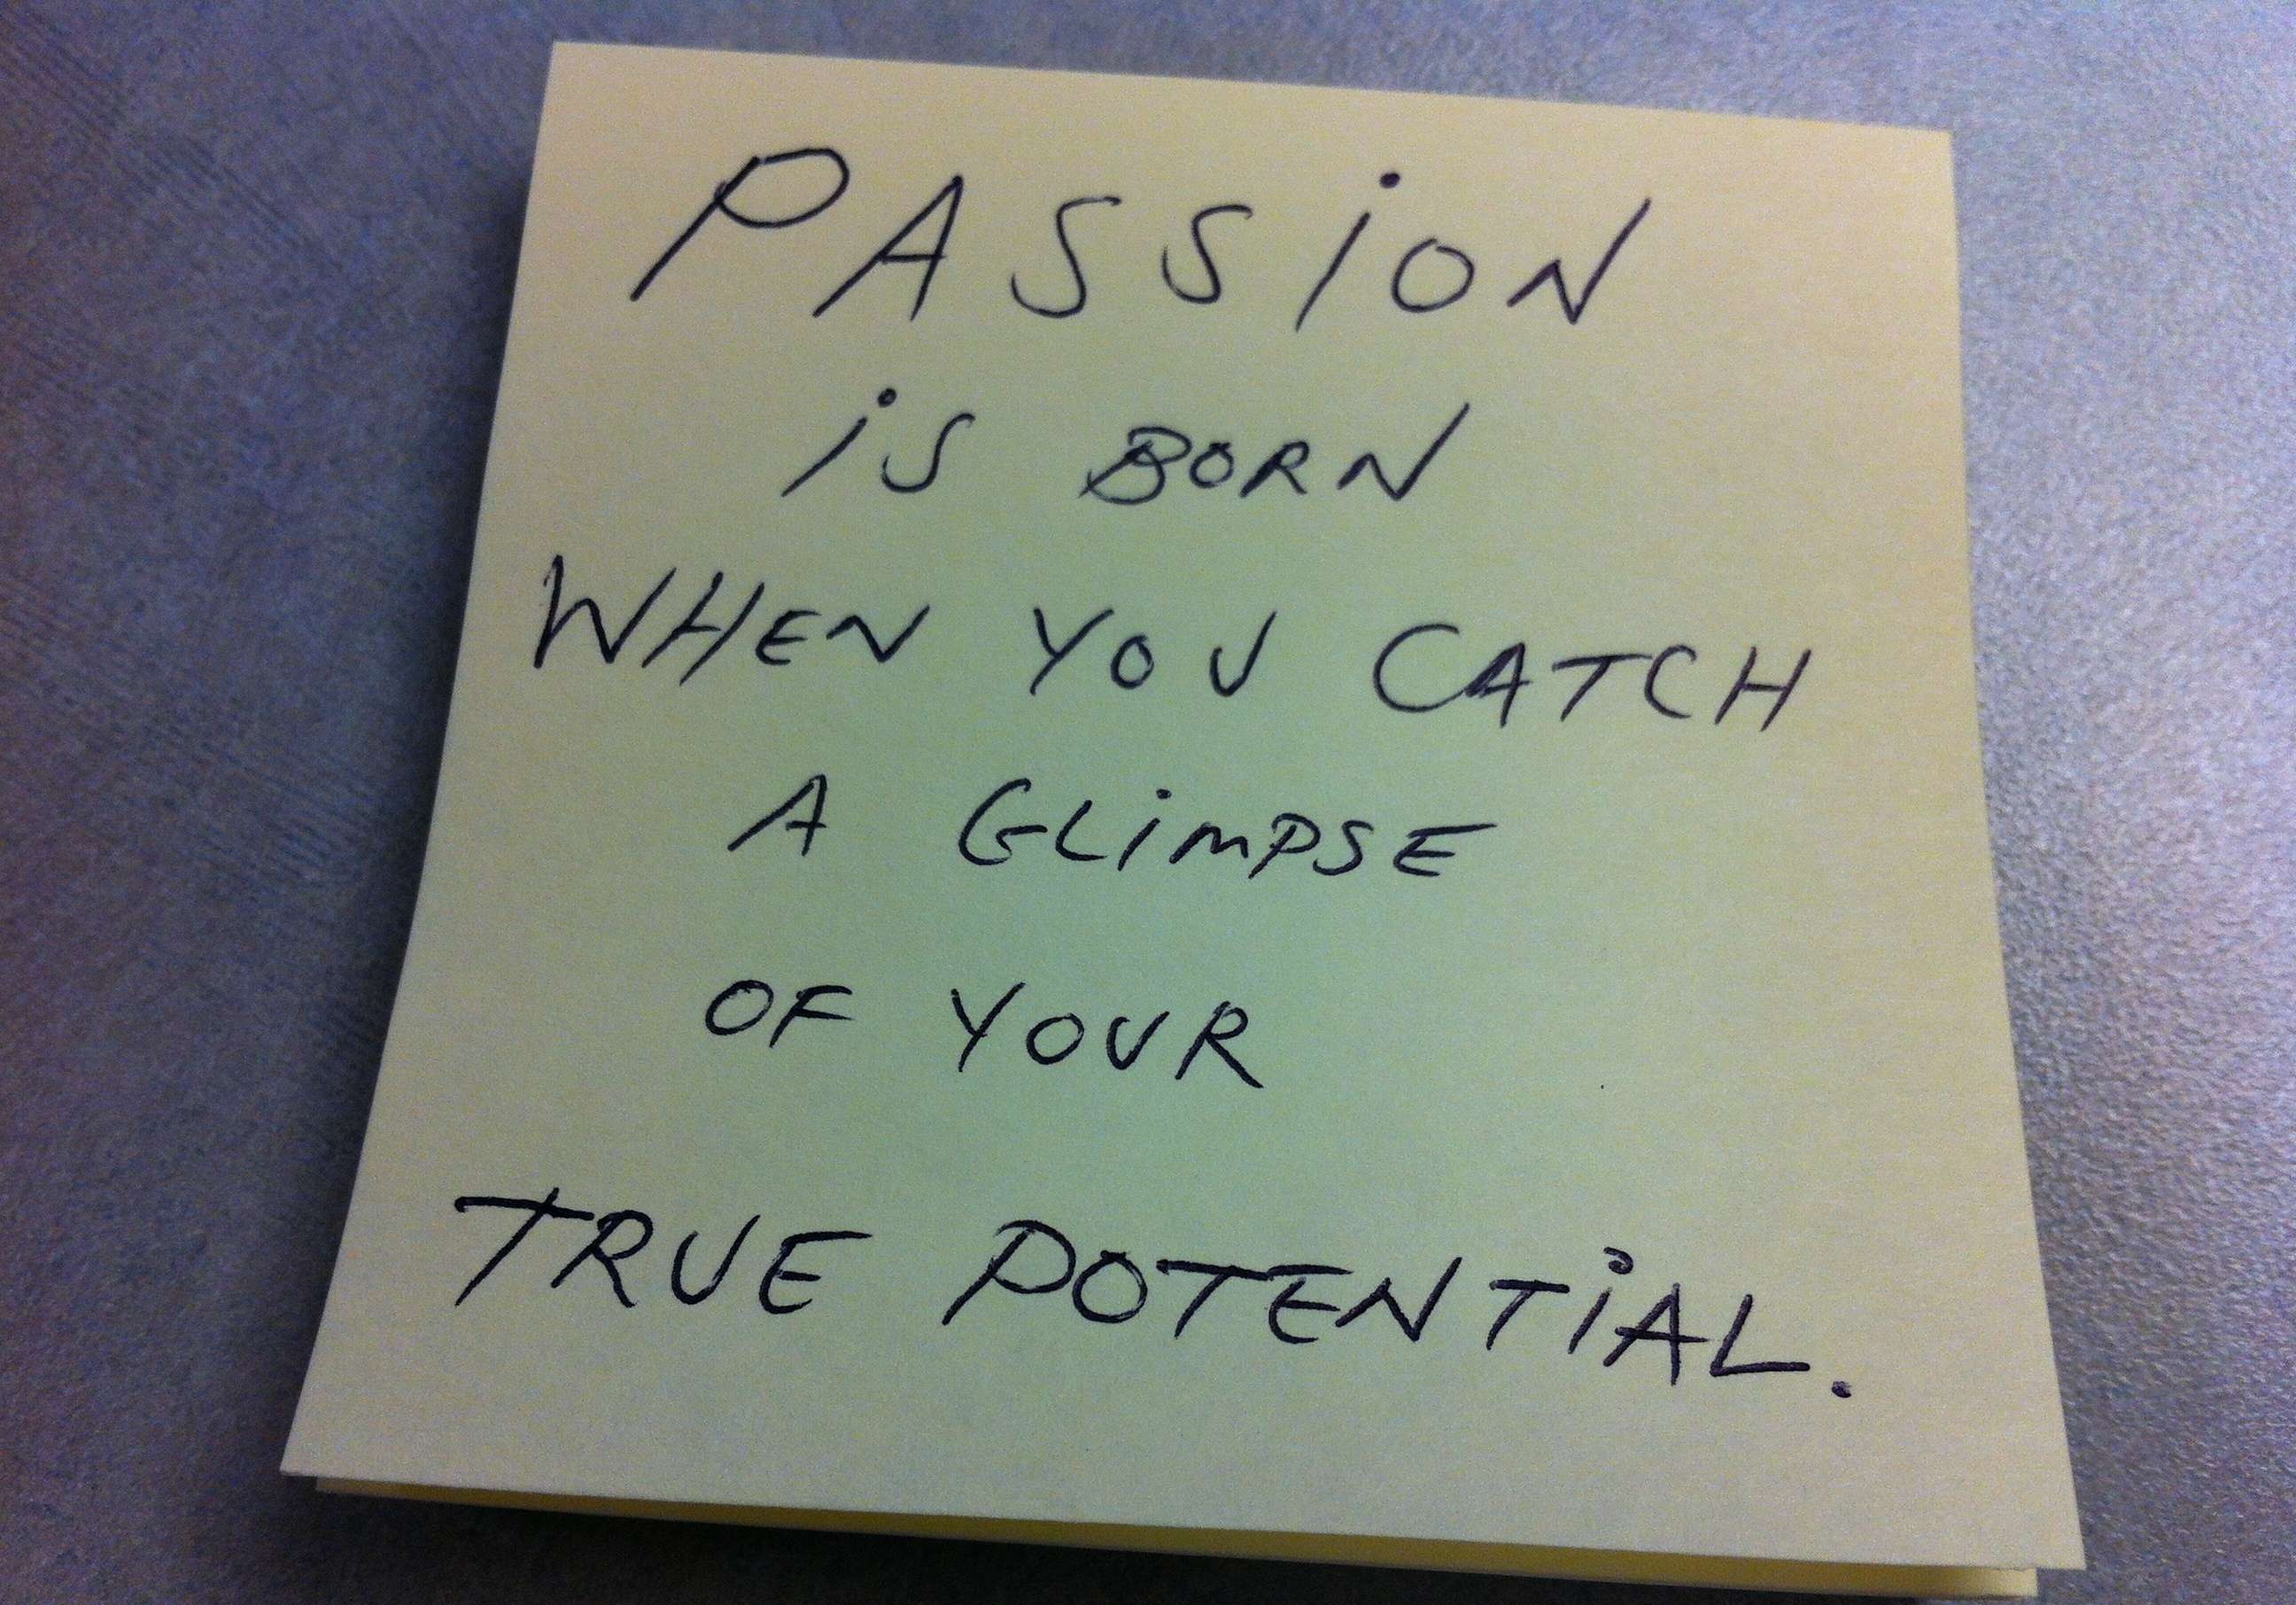 Passion is born when you catch a glimpse of your true potential